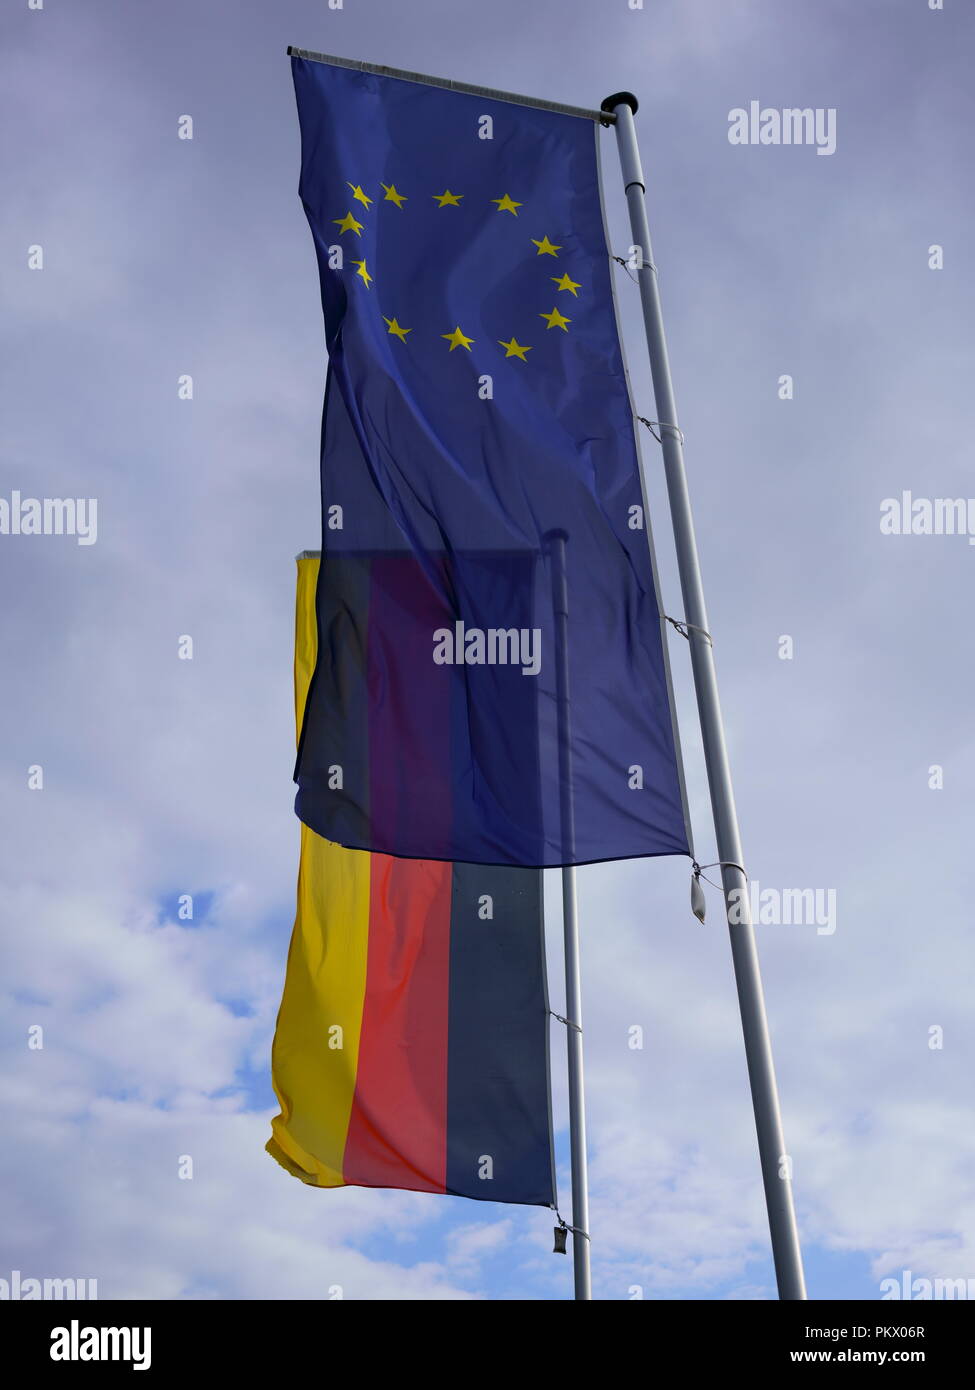 Flag of Europe along with flag of Germany. Transparent EU flag against German flag. Stock Photo